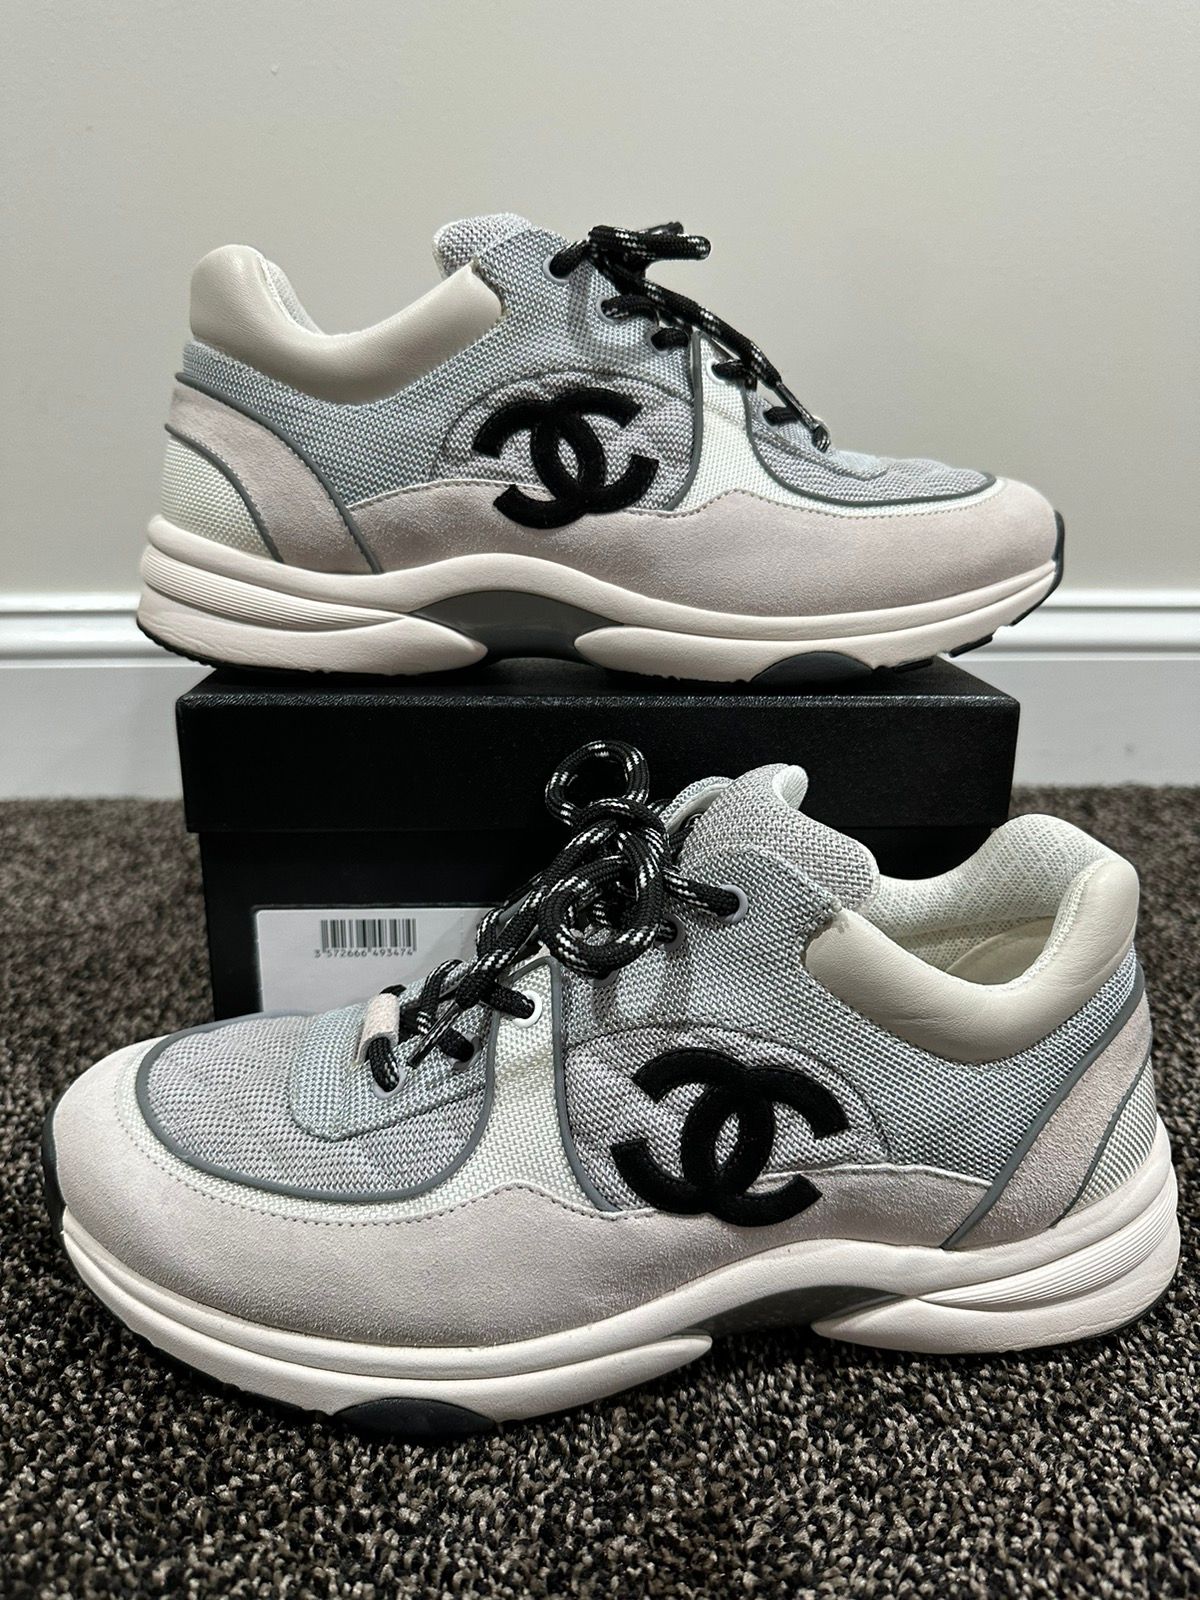 Pre-owned Chanel Cc Logo Quilted White / Grey Suede Trainer Sneakers